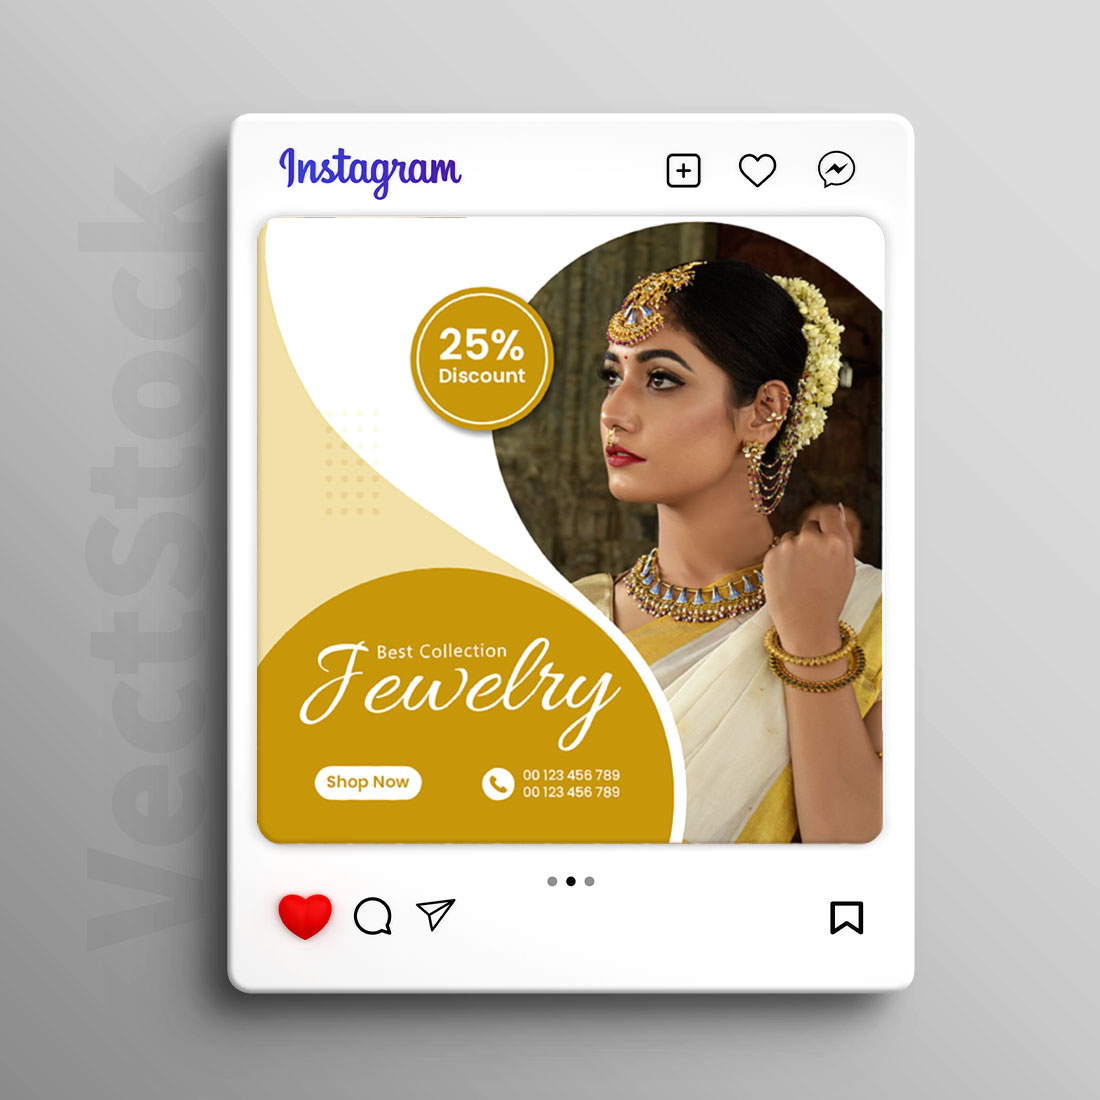 Jewelry social media instagram post template design preview image.